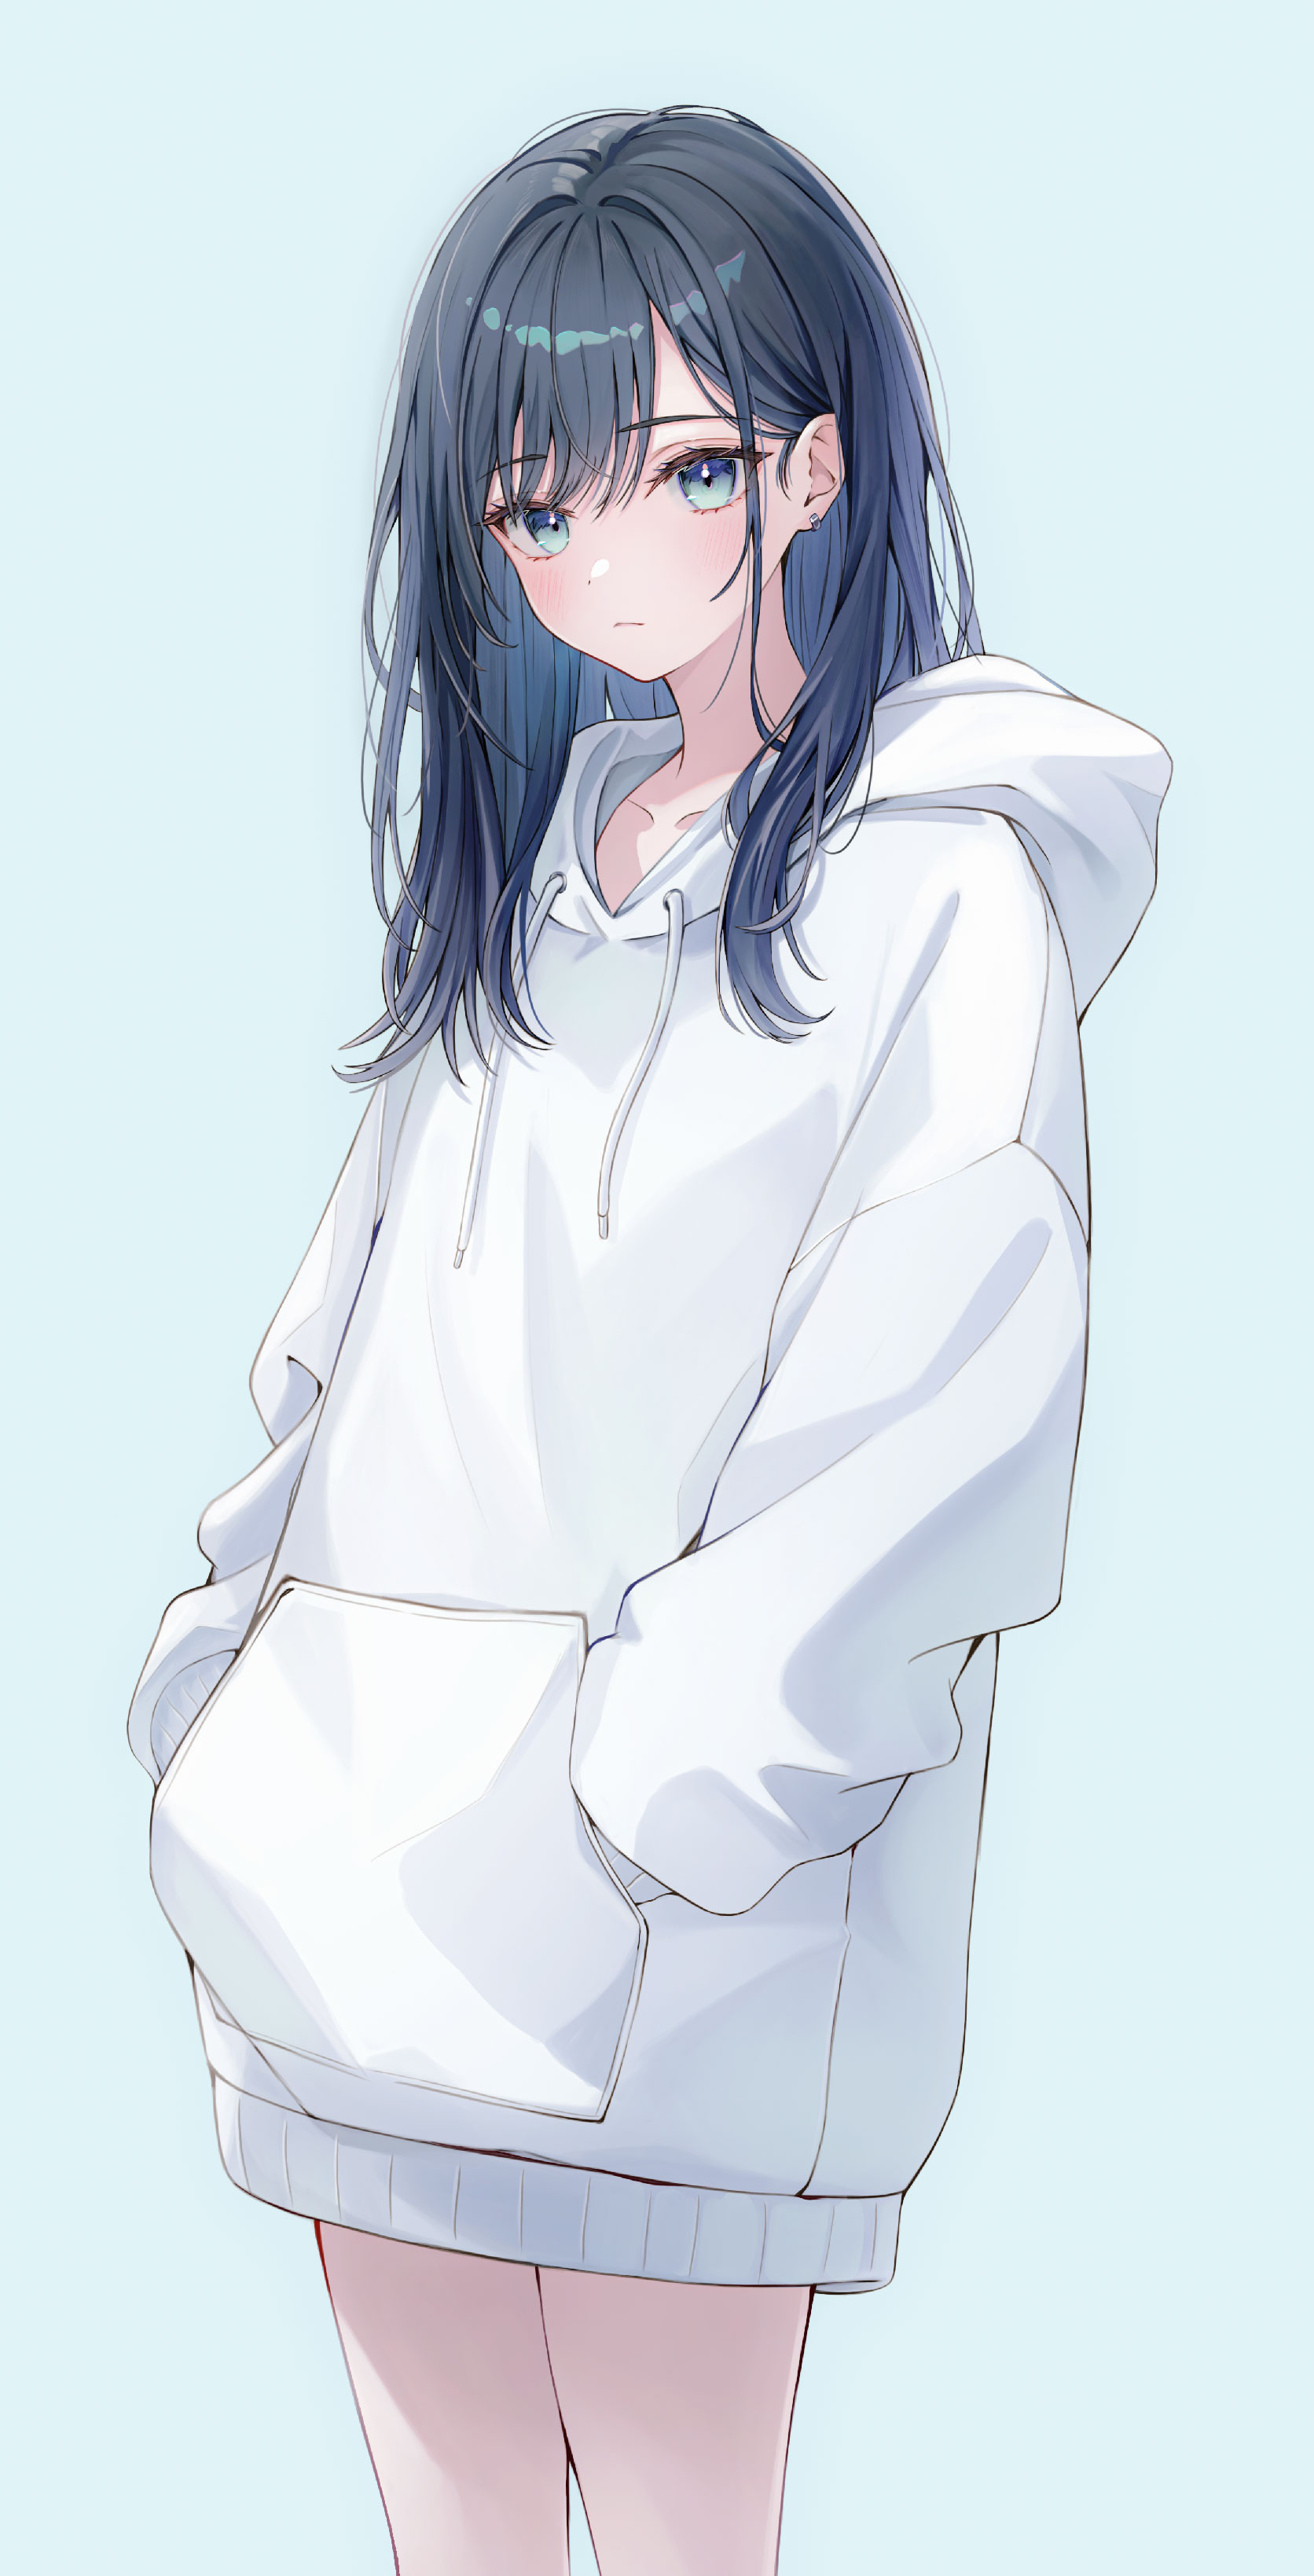 Anime 1672x3278 anime anime girls portrait display standing looking at viewer blushing blue hair blue eyes simple background long hair hands in pockets minimalism ear piercing